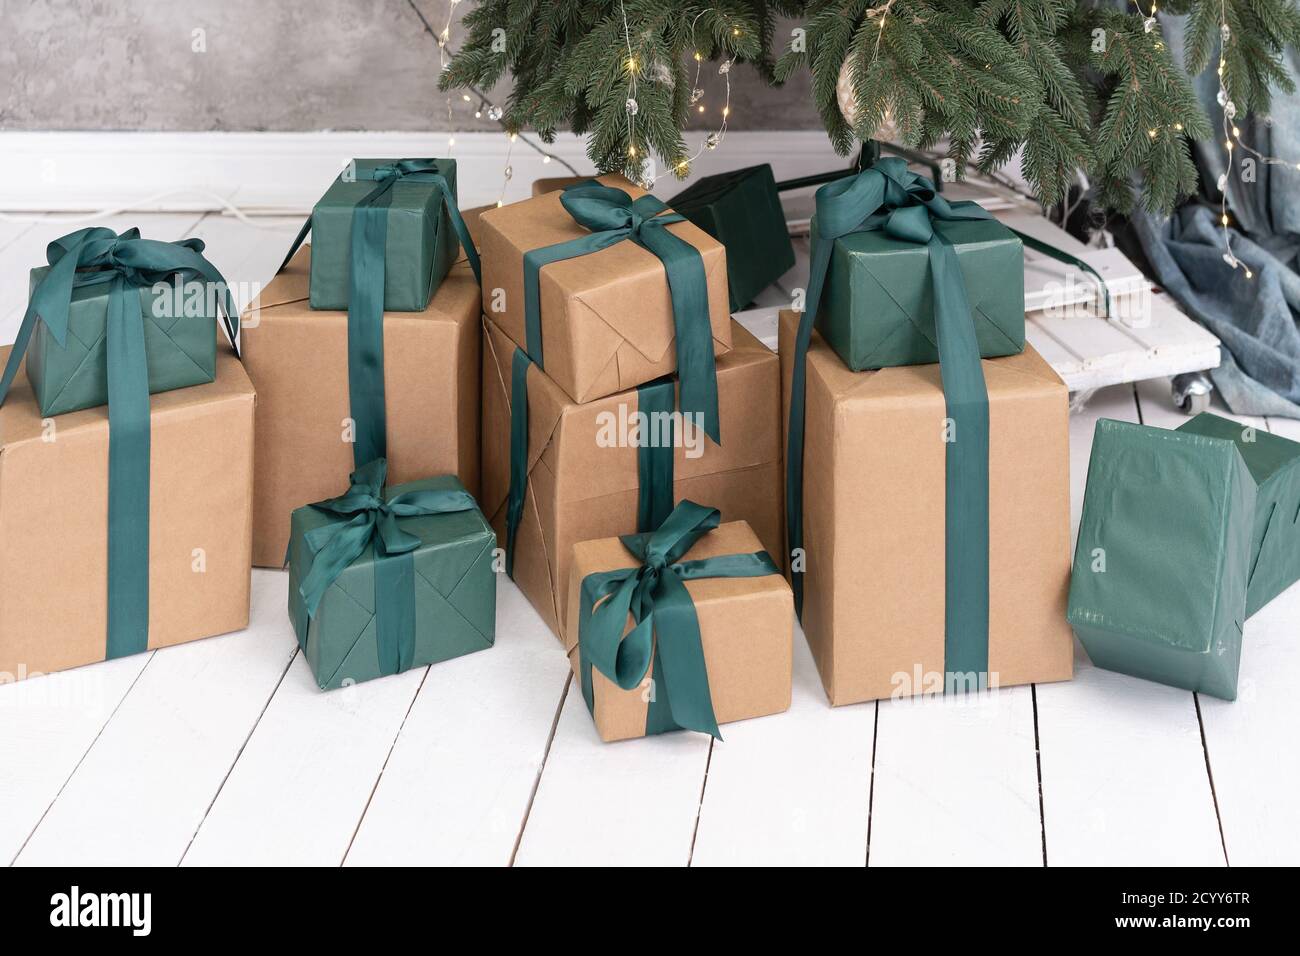 New Year's gifts lie on the floor under the Christmas tree. They are packed in green paper and wrapped in green ribbon. High quality photo Stock Photo